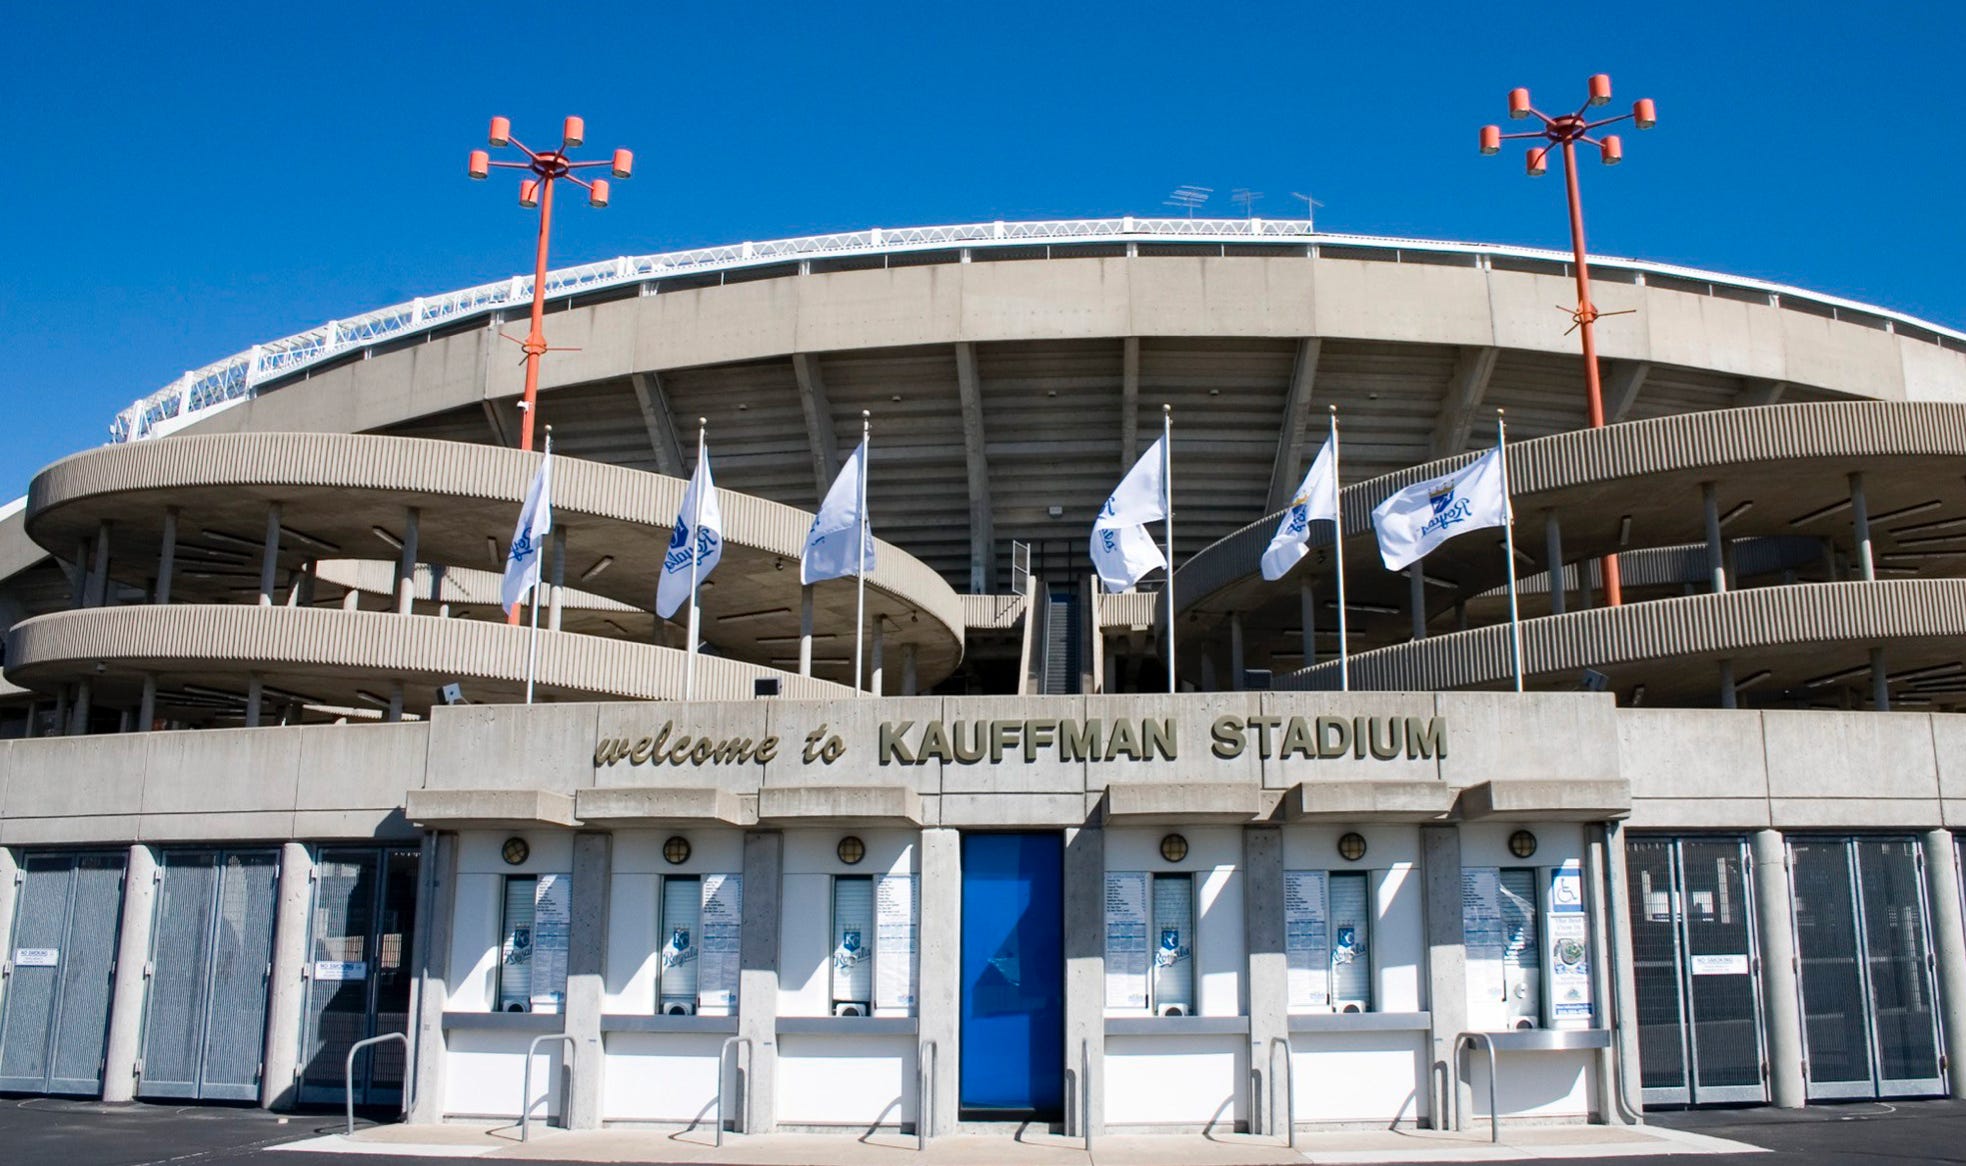 Royals to welcome fans back to Kauffman Stadium